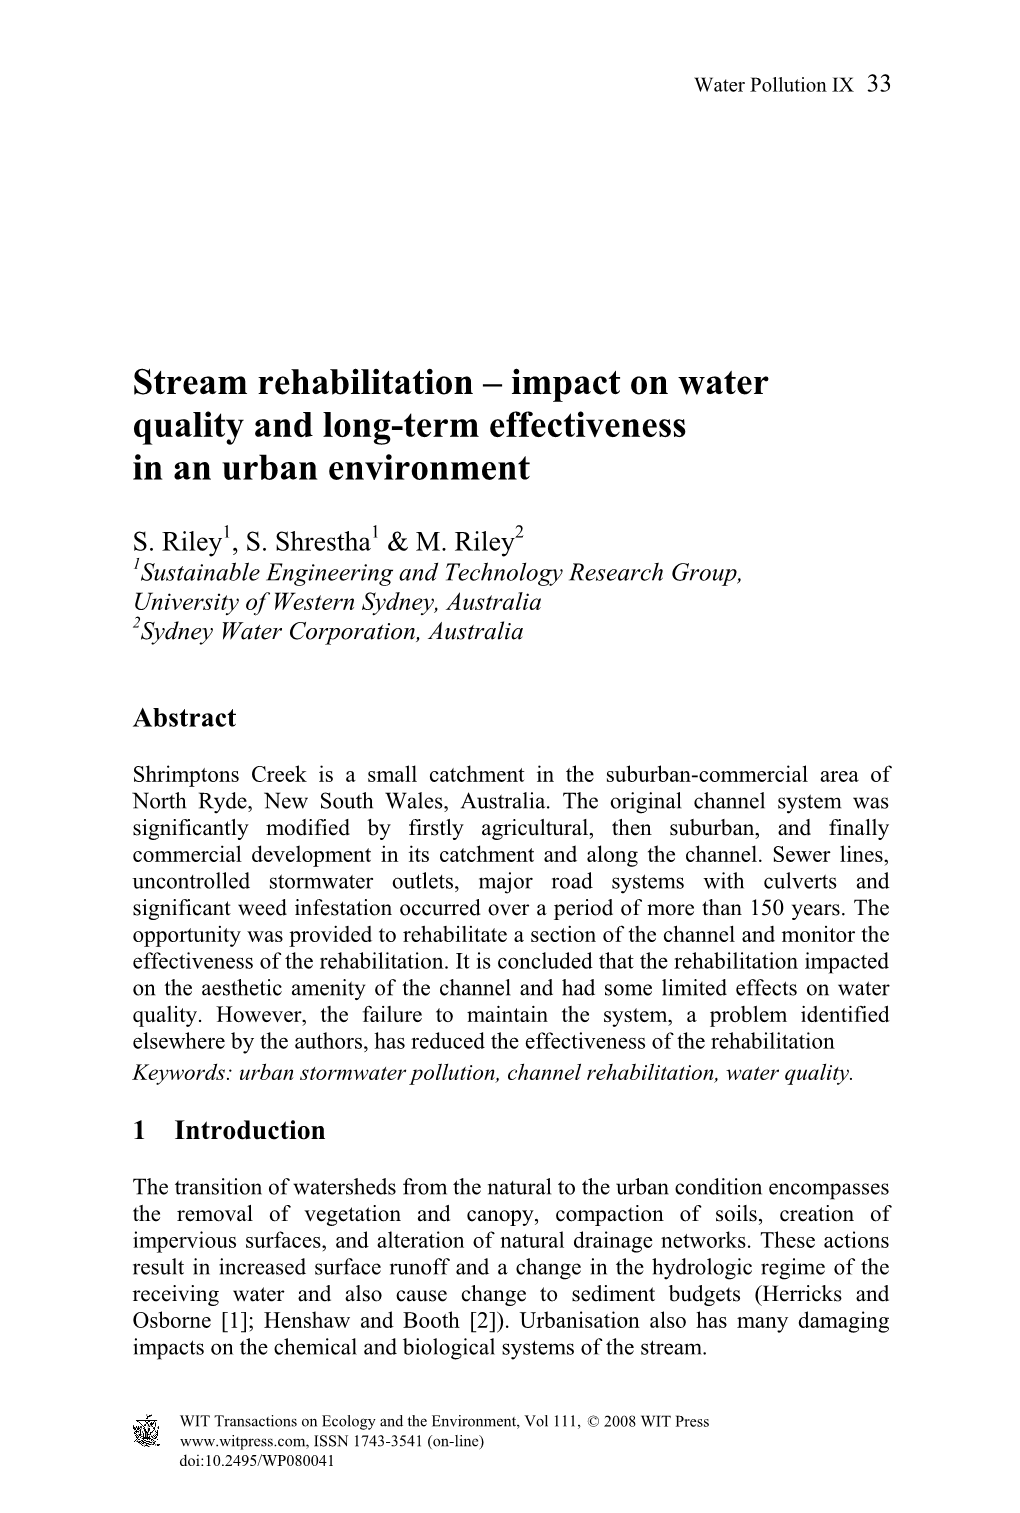 Stream Rehabilitation – Impact on Water Quality and Long-Term Effectiveness in an Urban Environment